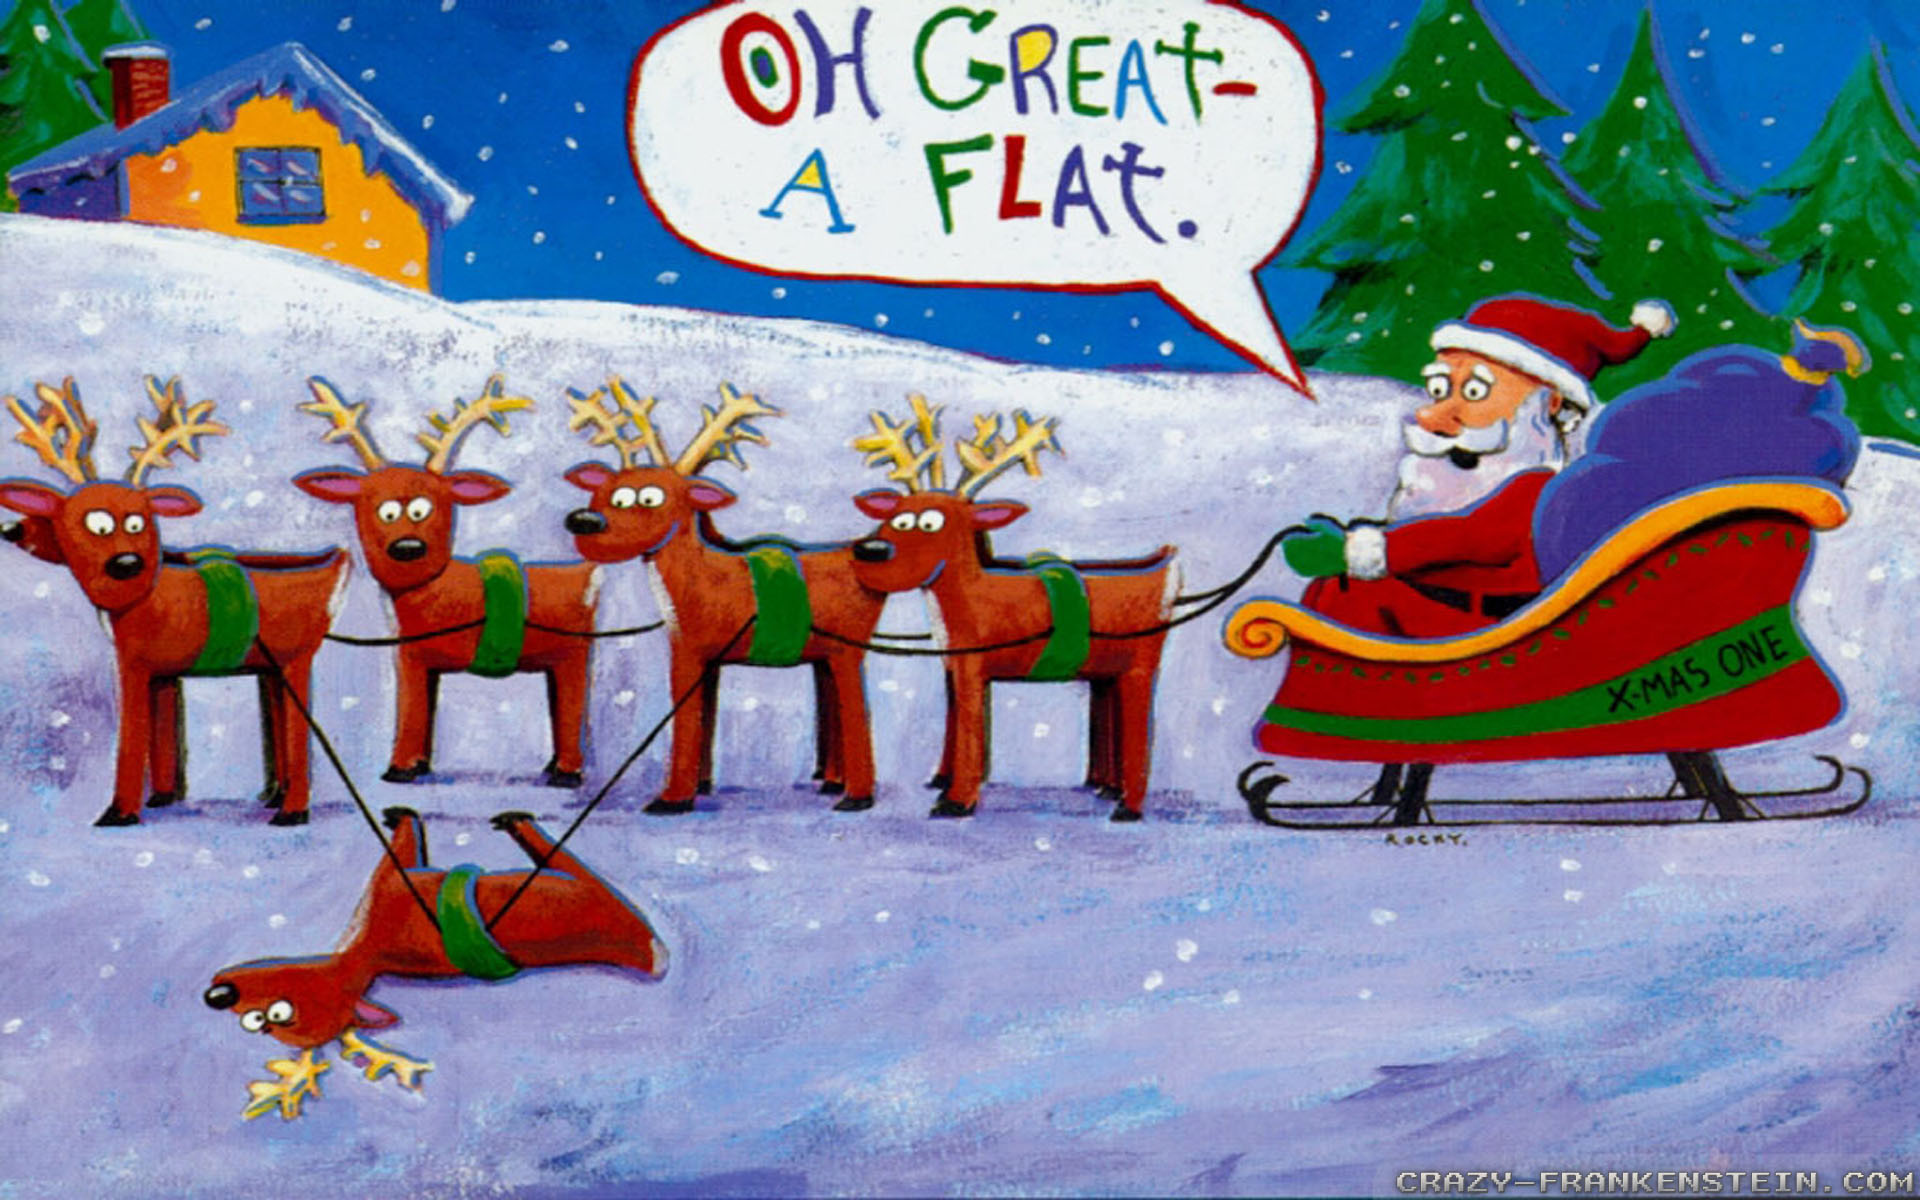 1920x1200 Wallpaper: Funny Christmas wallpapers 2. Resolution: 1024x768 | 1280x1024 |  1600x1200. Widescreen Res: 1440x900 | 1680x1050 | 